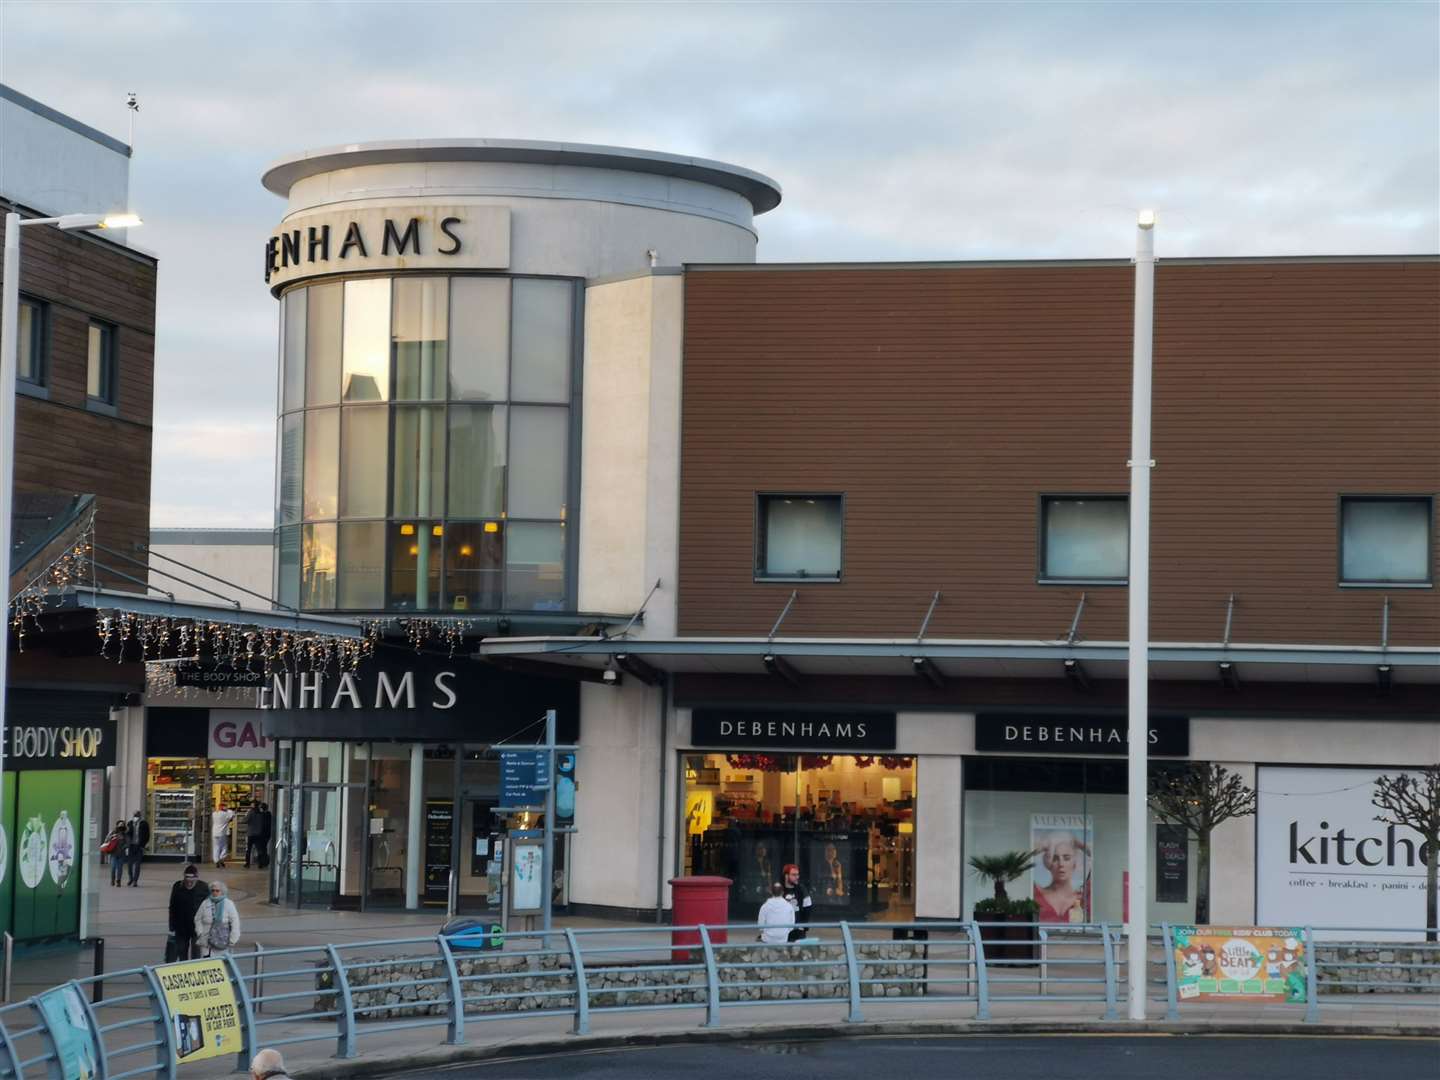 Hollywood Bowl is set to move into the former Debenhams at Westwood Cross in Broadstairs